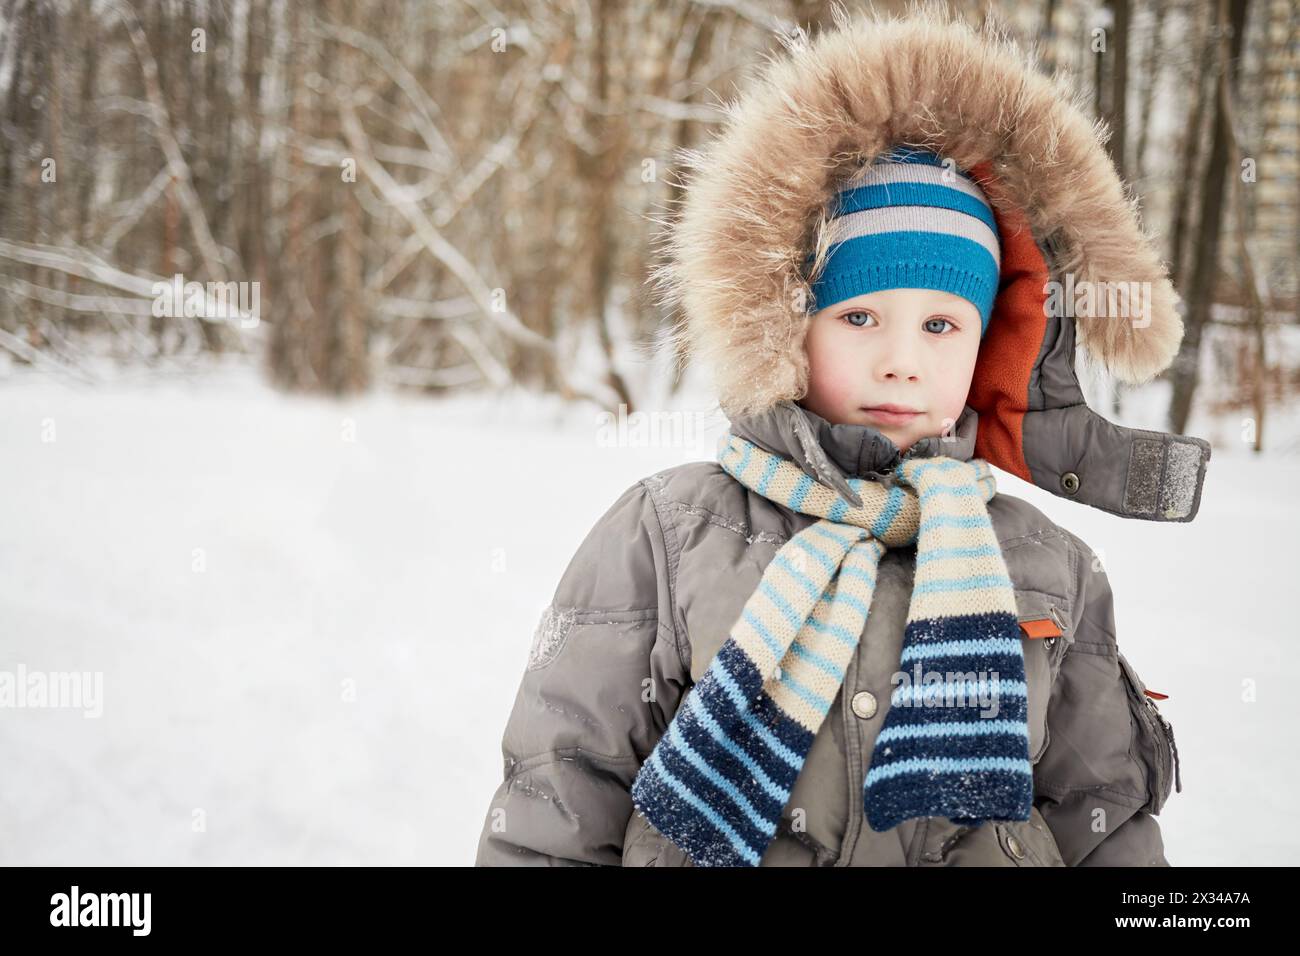 Half-length portrait of boy dressed in winter jacket with fur trimmed hood. Stock Photo